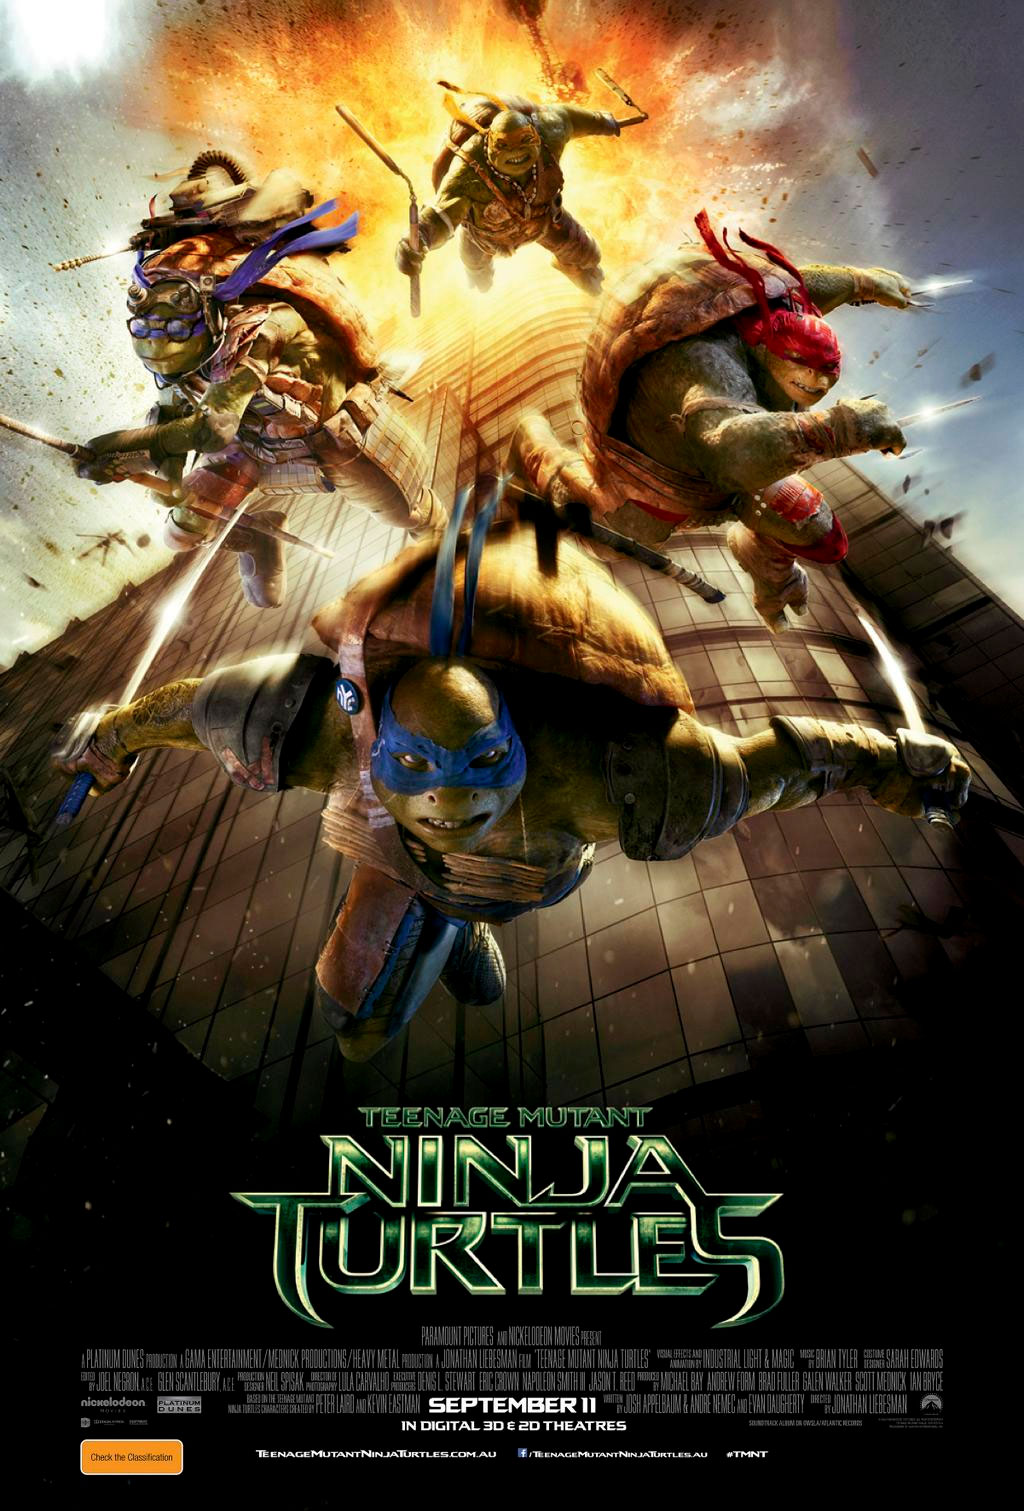 https://static.wikia.nocookie.net/to-hollywood-and-beyond/images/3/31/Teenage_Mutant_Ninja_Turtles2014.jpg/revision/latest?cb=20161210223646